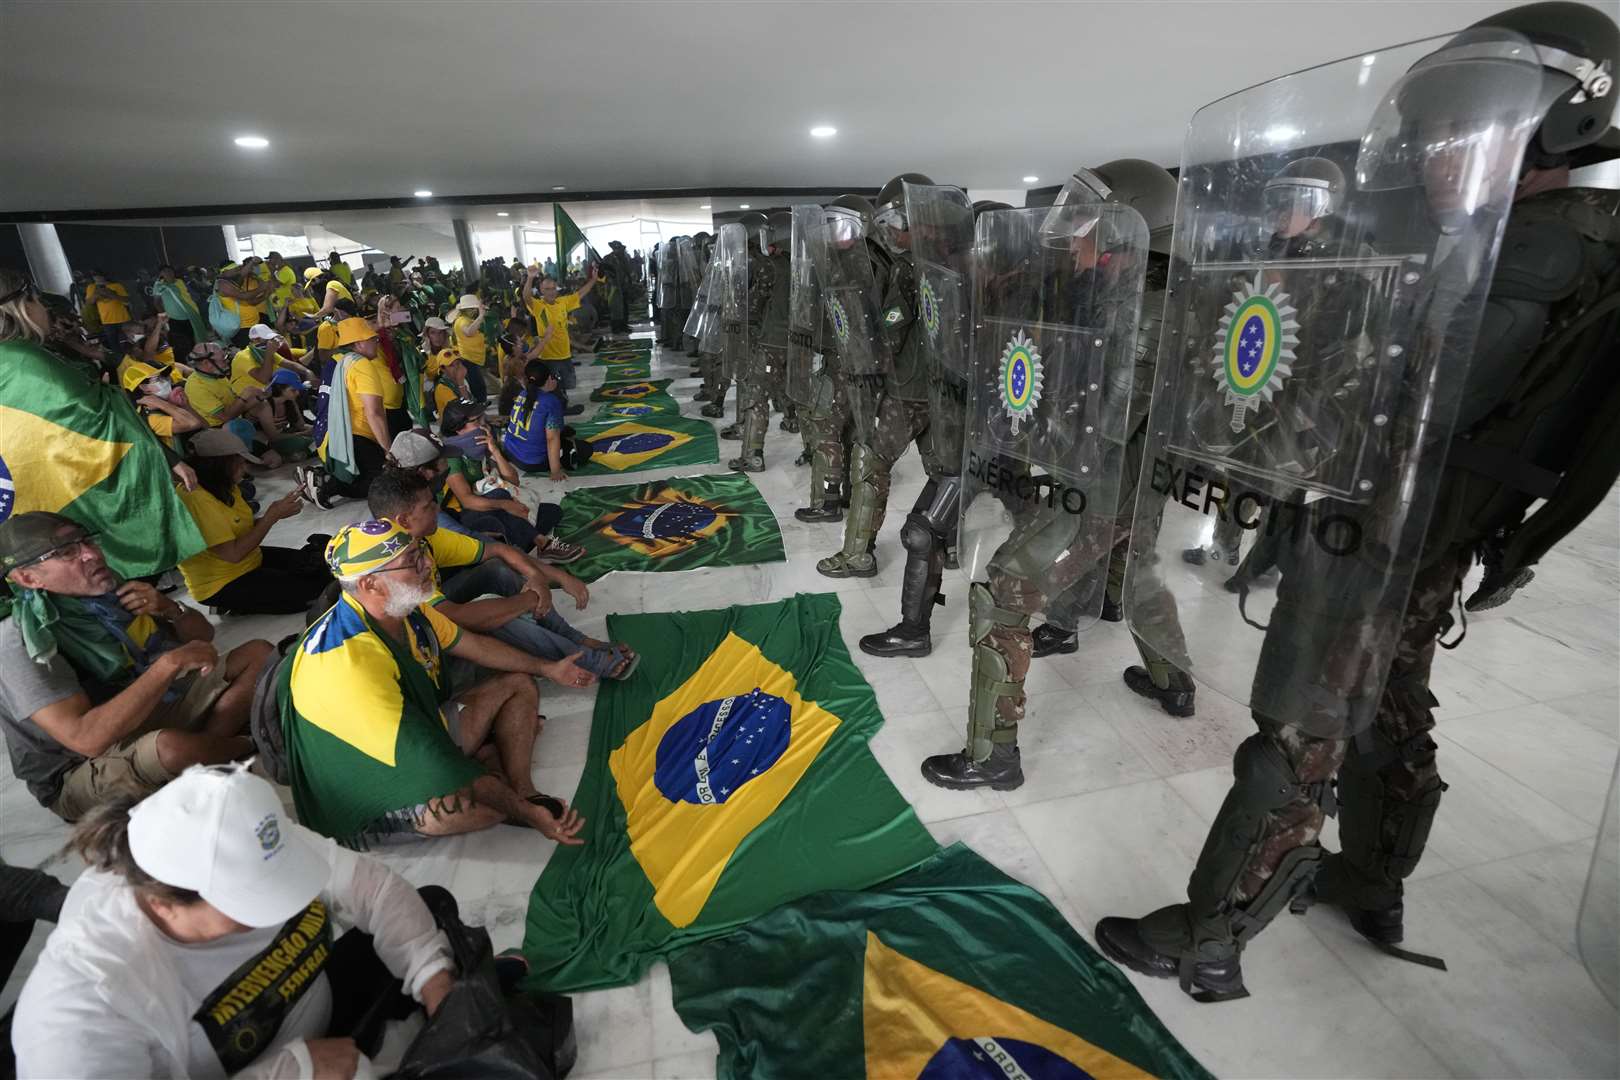 Protesters supporting Brazil’s former president Jair Bolsonar sit in front of police after inside Planalto Palace after storming it (Eraldo Peres/AP)